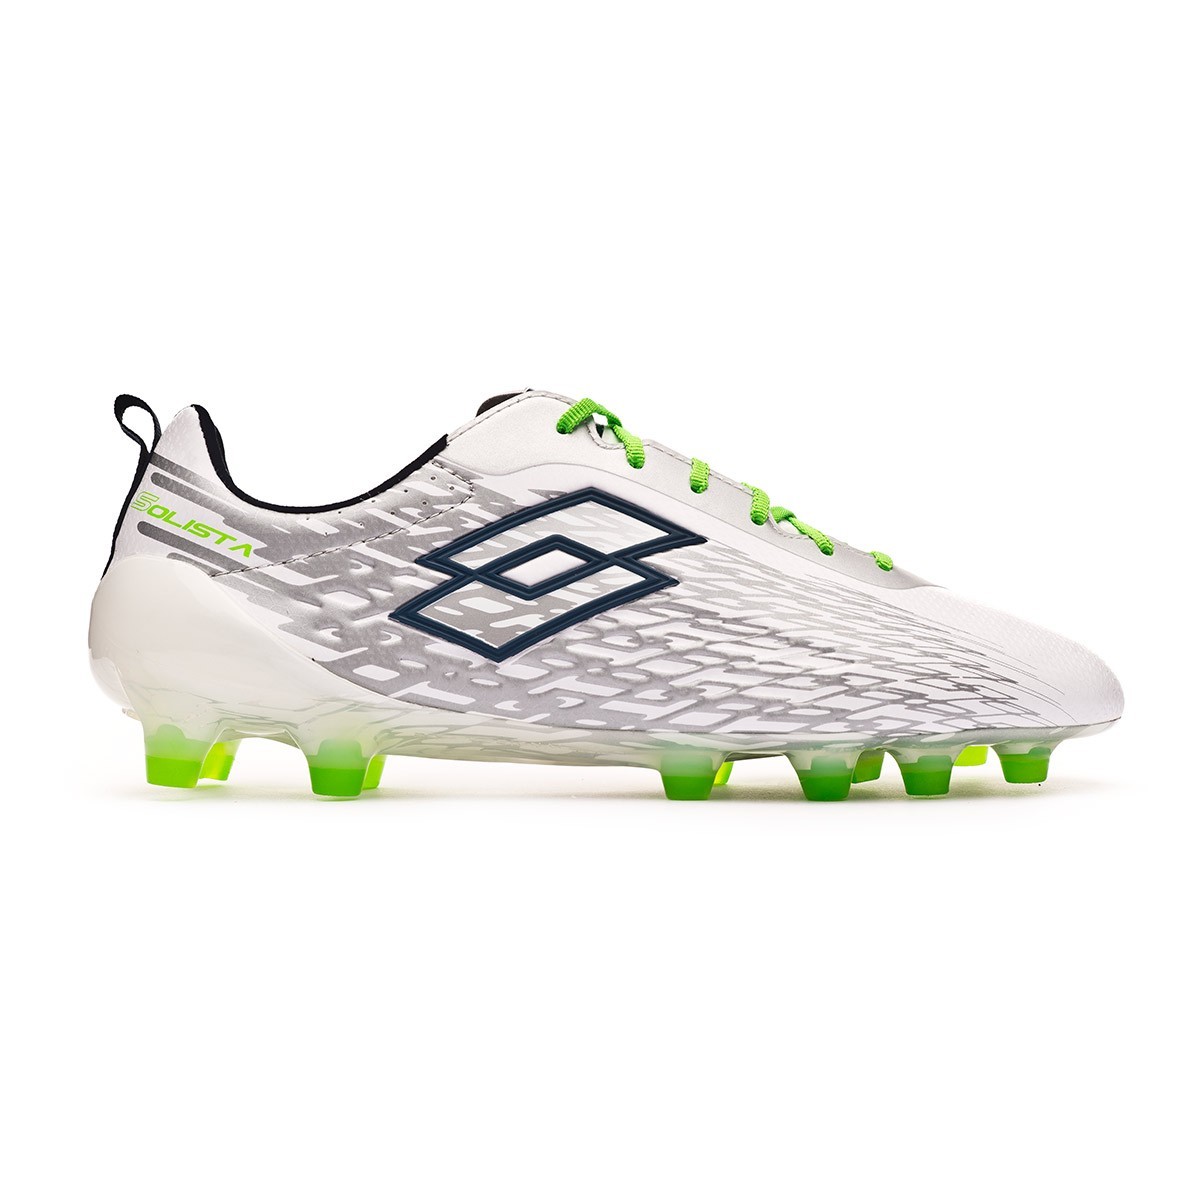 lotto soccer boots